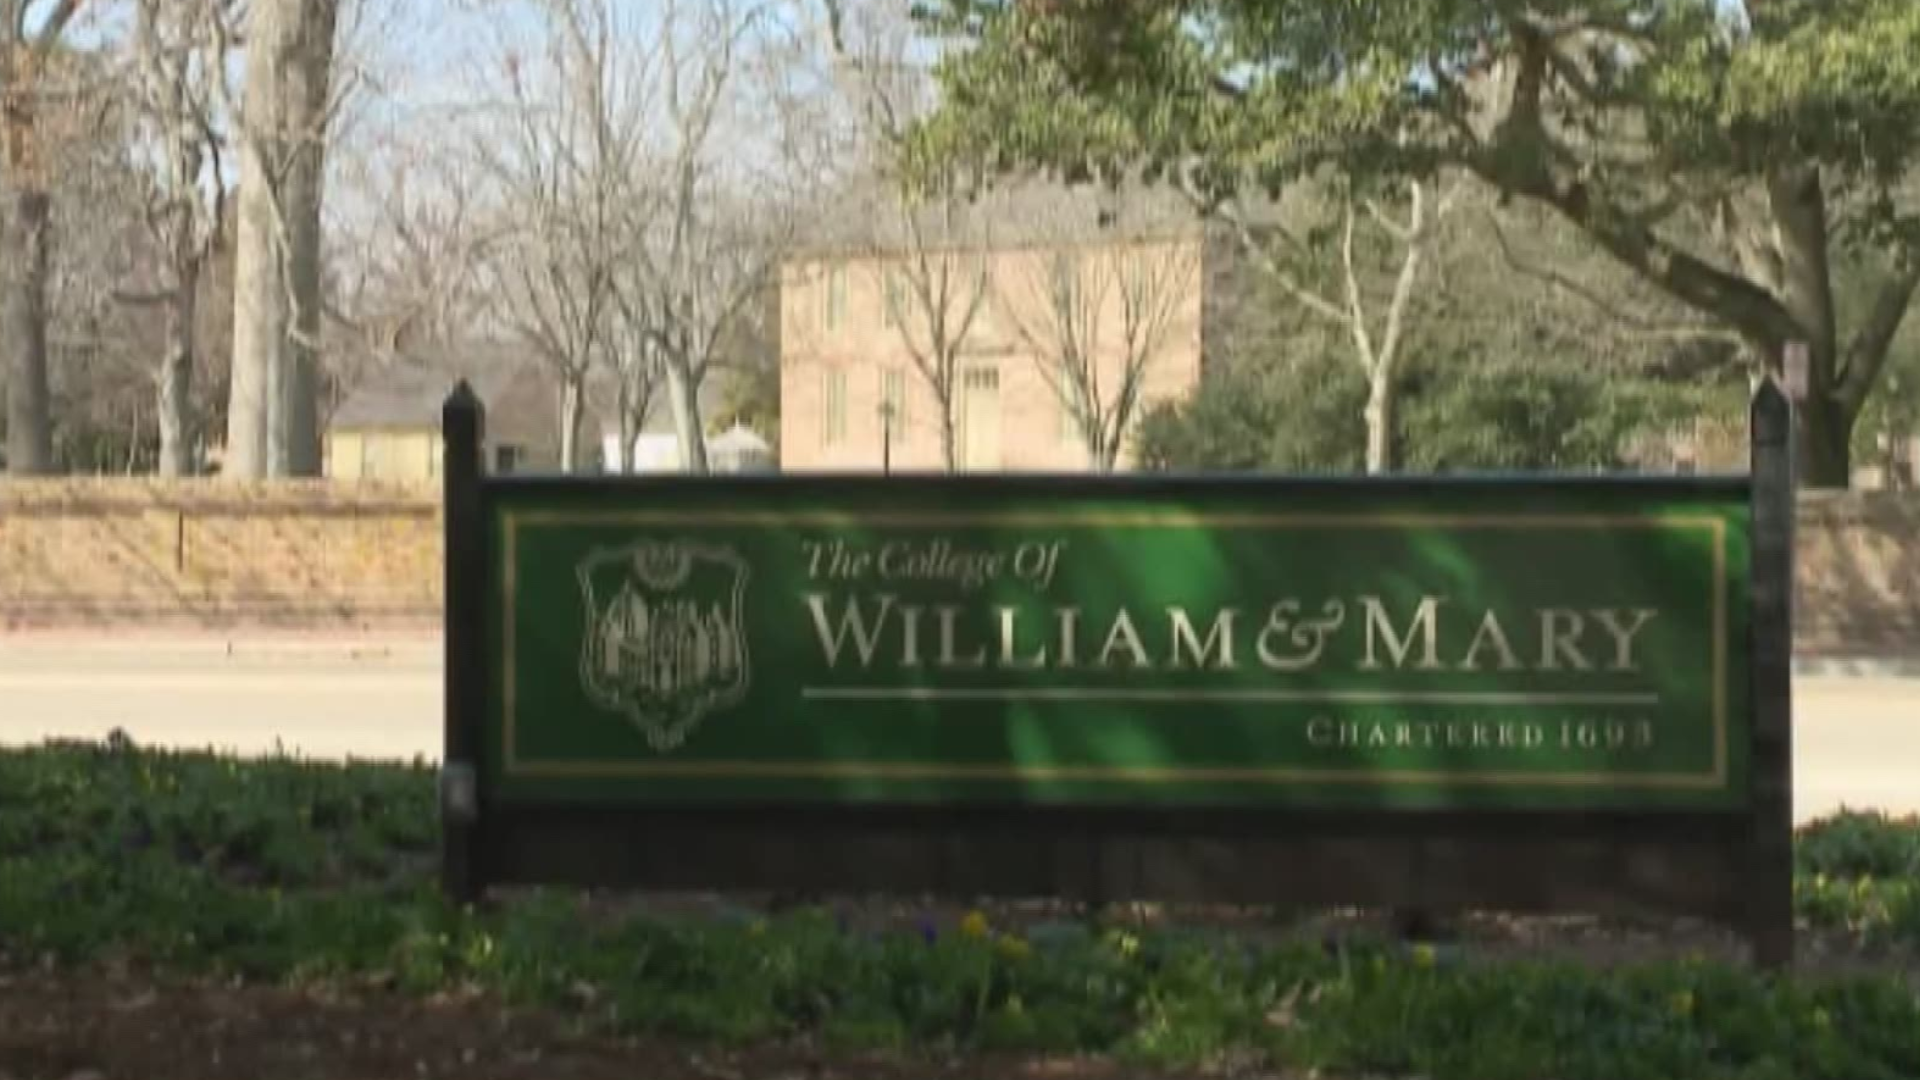 Under a partnership with Dominion Energy, William and Mary will get nearly 50 percent of its electricity from renewable energy.